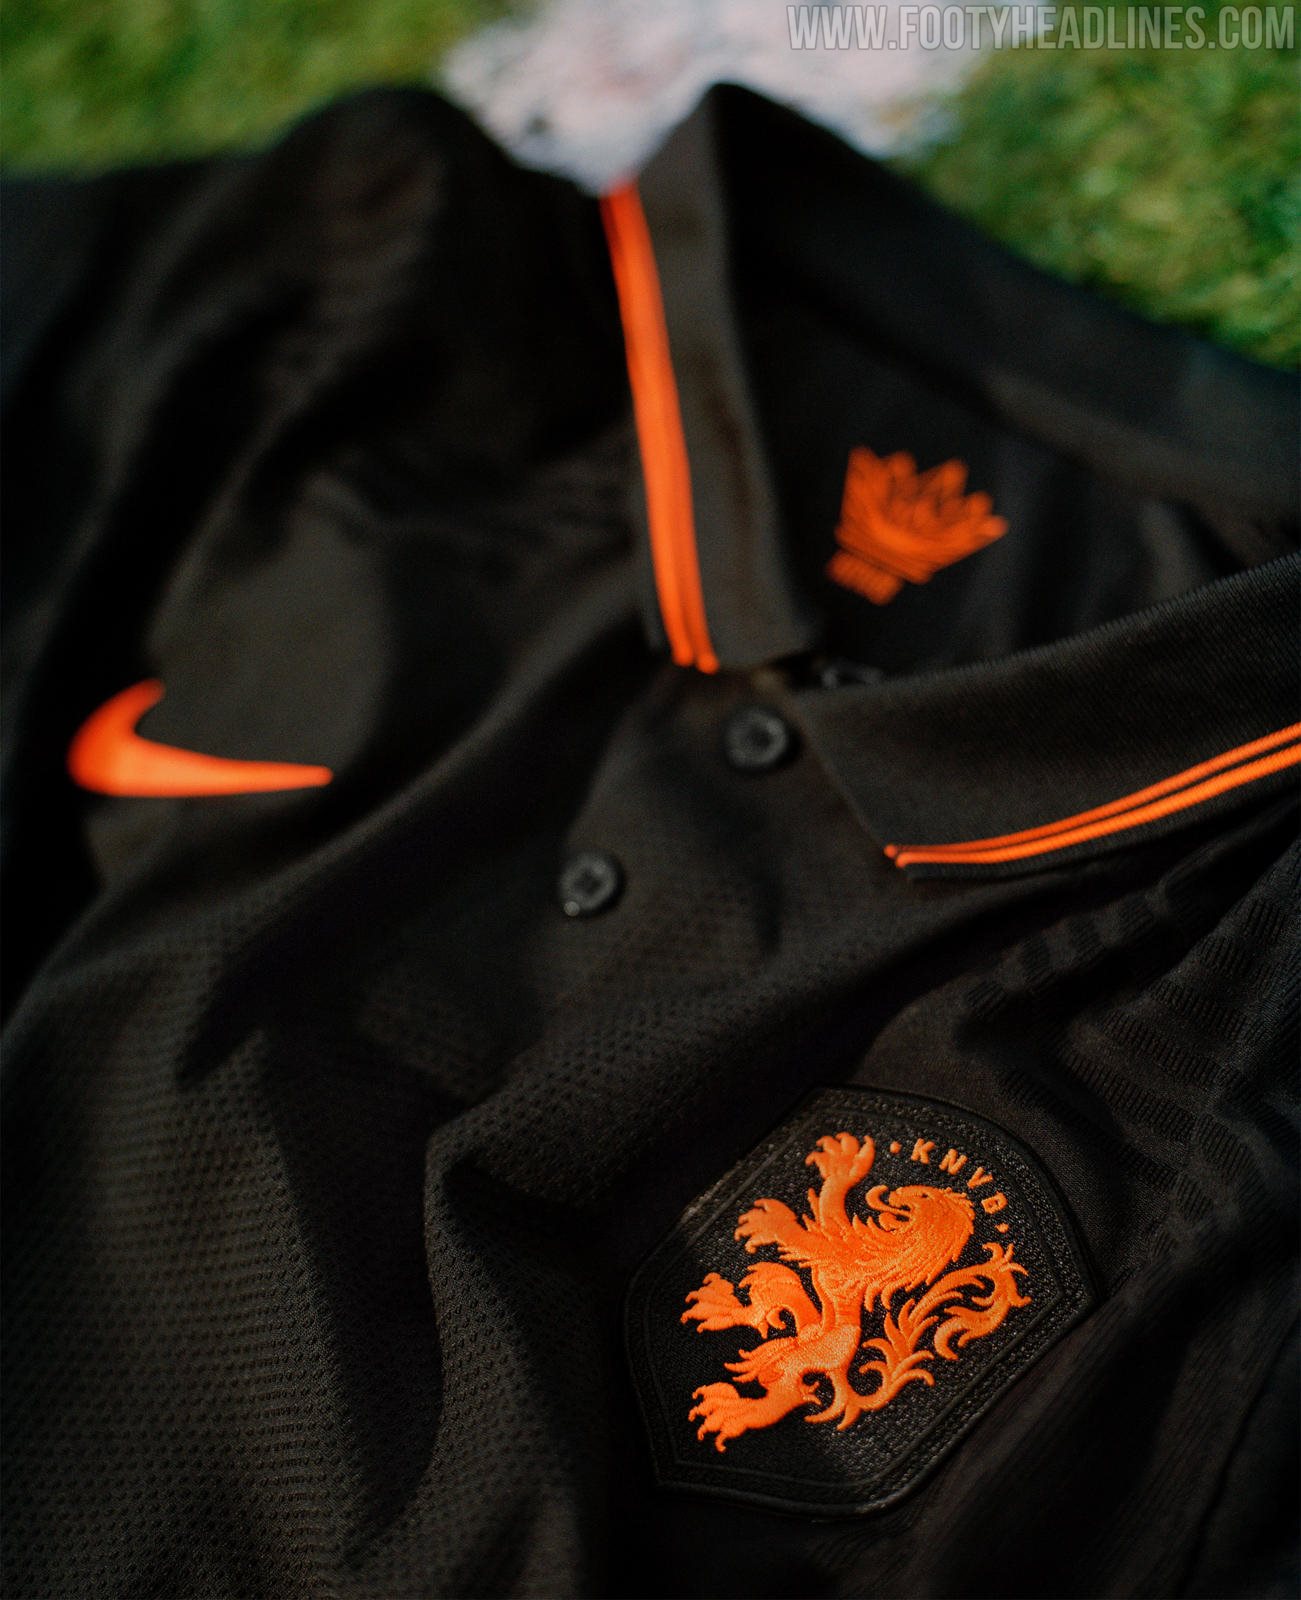 Spectacular Netherlands Euro 2020 Home & Away Kits Released